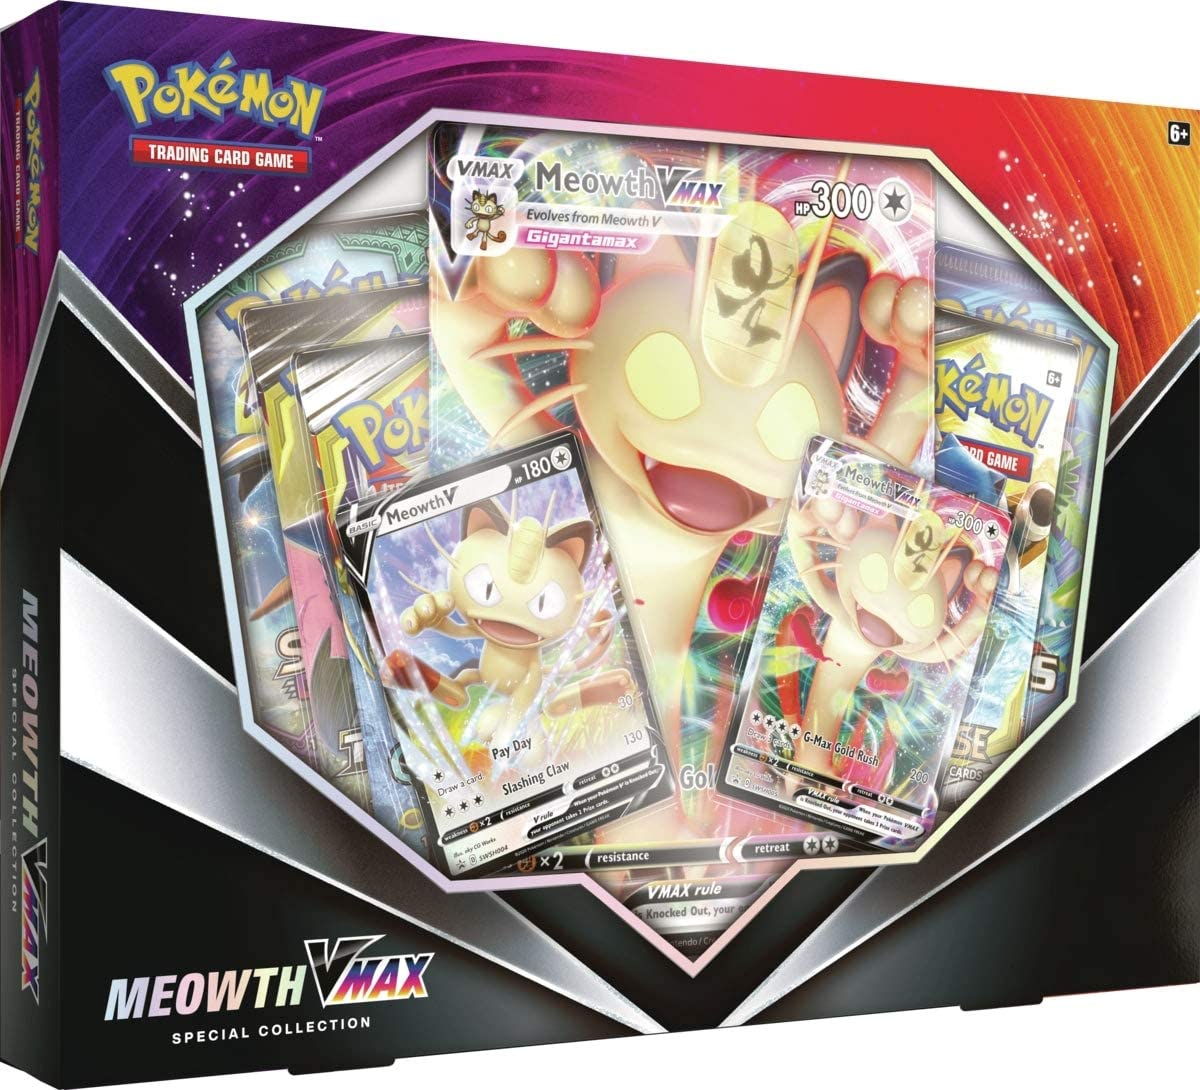 Meowth Vmax Special Collection